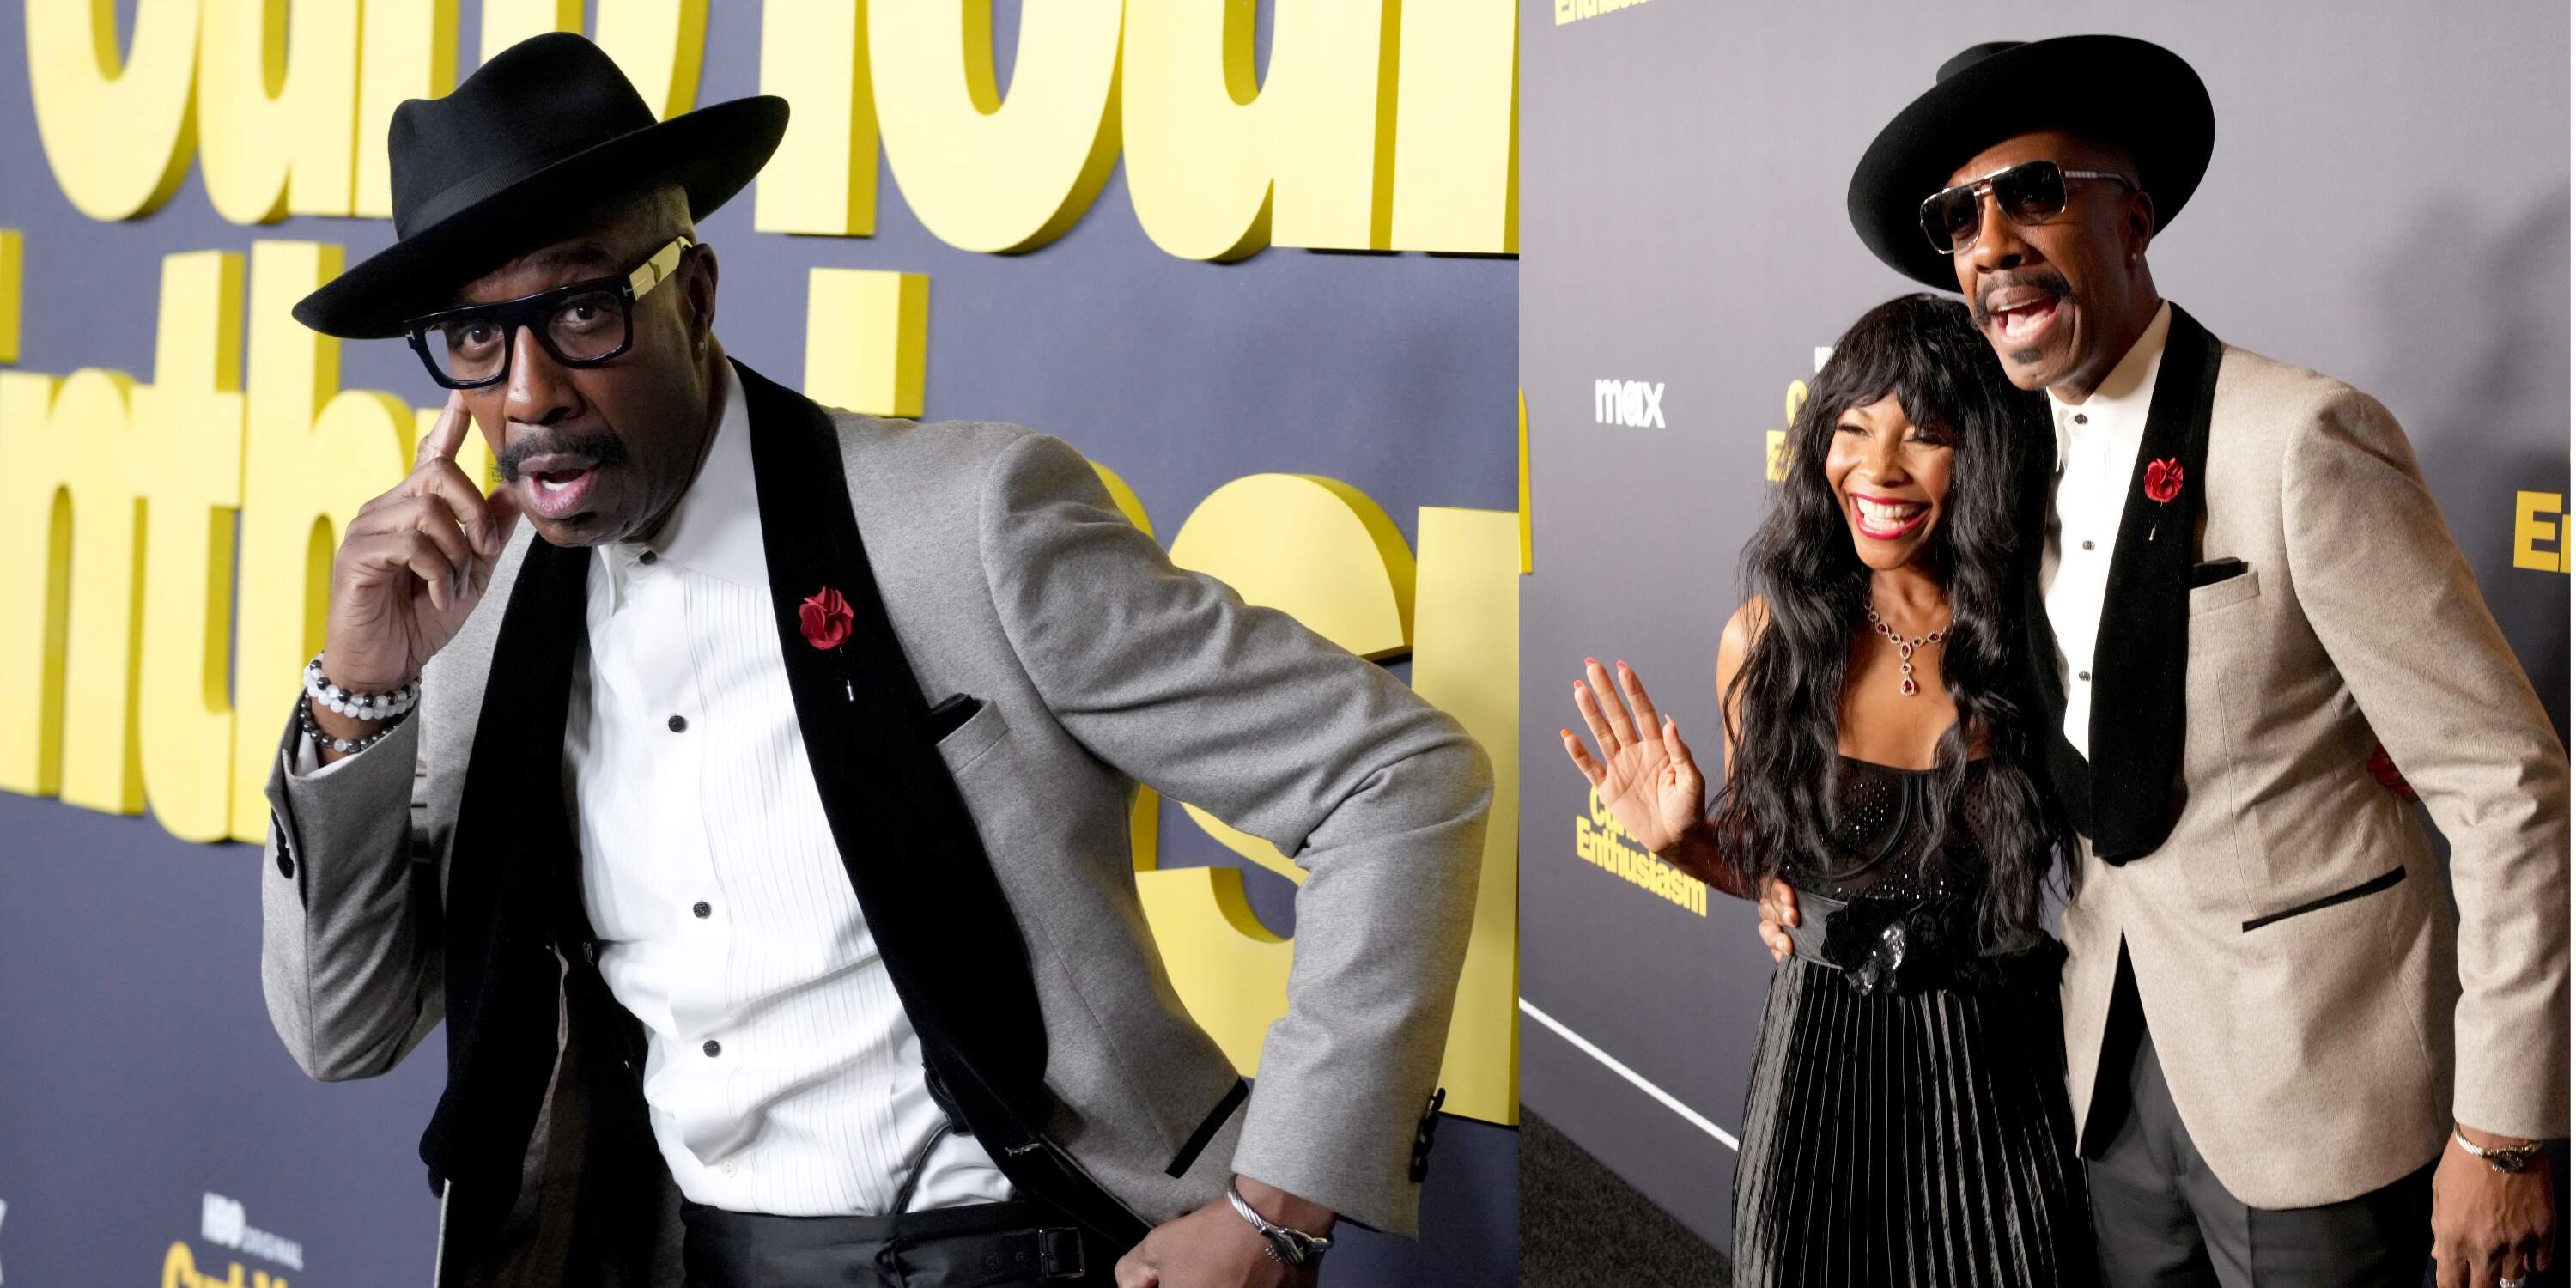 Married couple Shahidah Omar and J.B. Smoove pose together for cameras